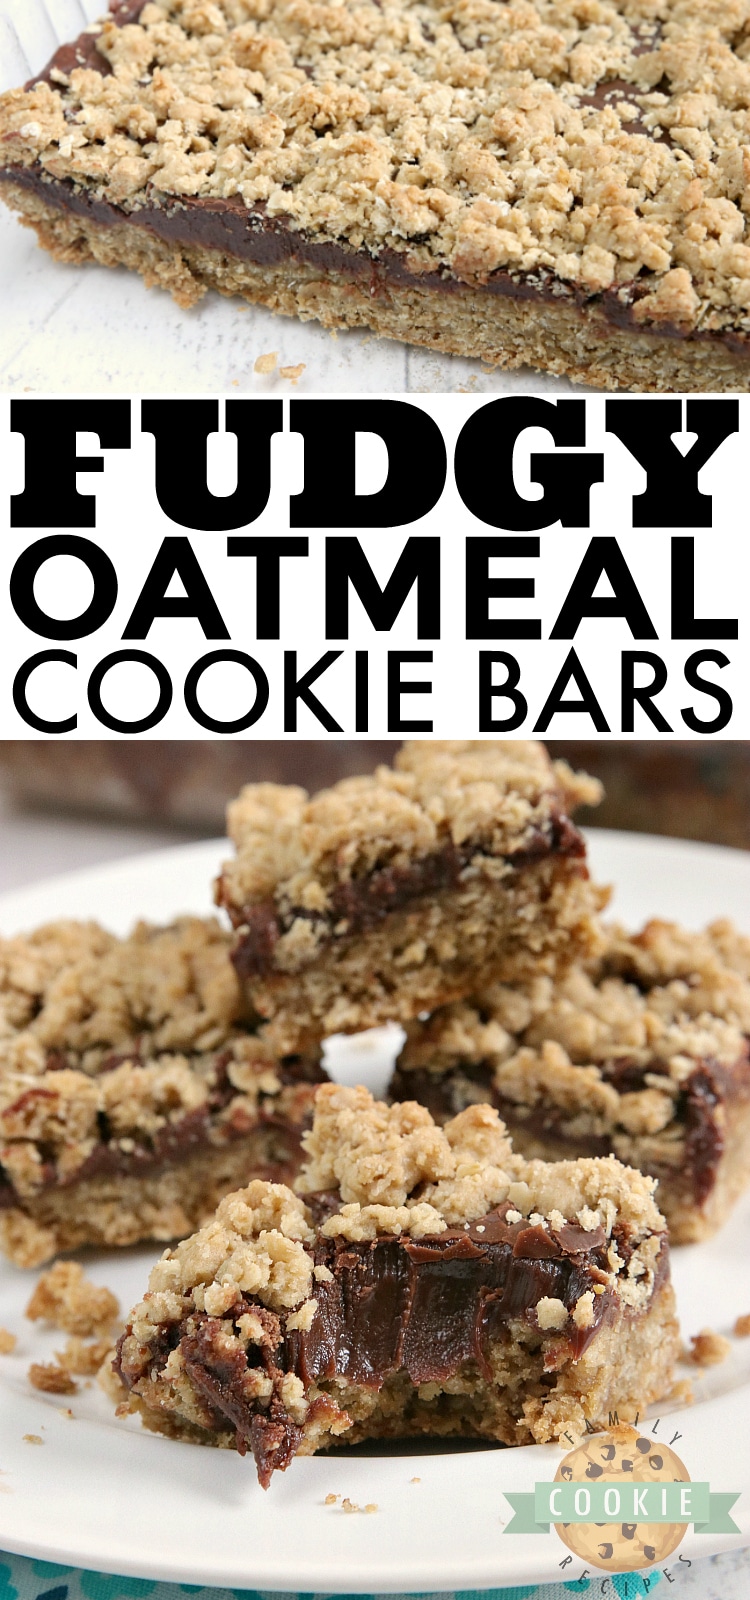 Fudgy Oatmeal Cookie Bars are made with a thick chocolate ganache in between two layers of a soft and chewy oatmeal cookie recipe.  This cookie bar recipe is absolutely amazing! via @buttergirls